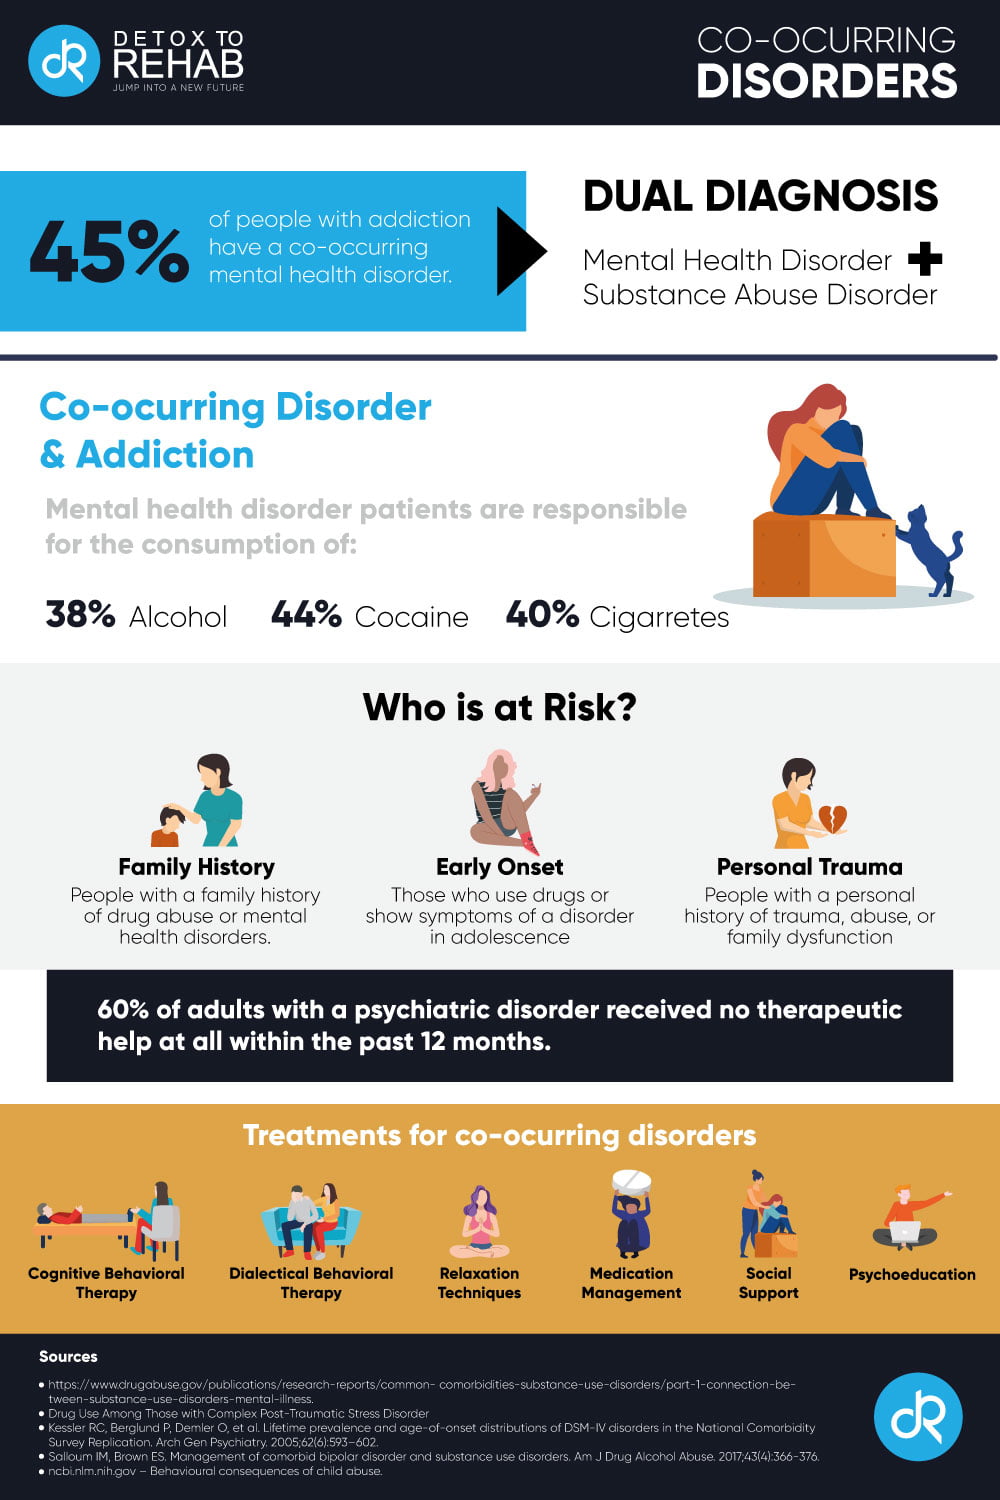 co-ocurring disorders infographic